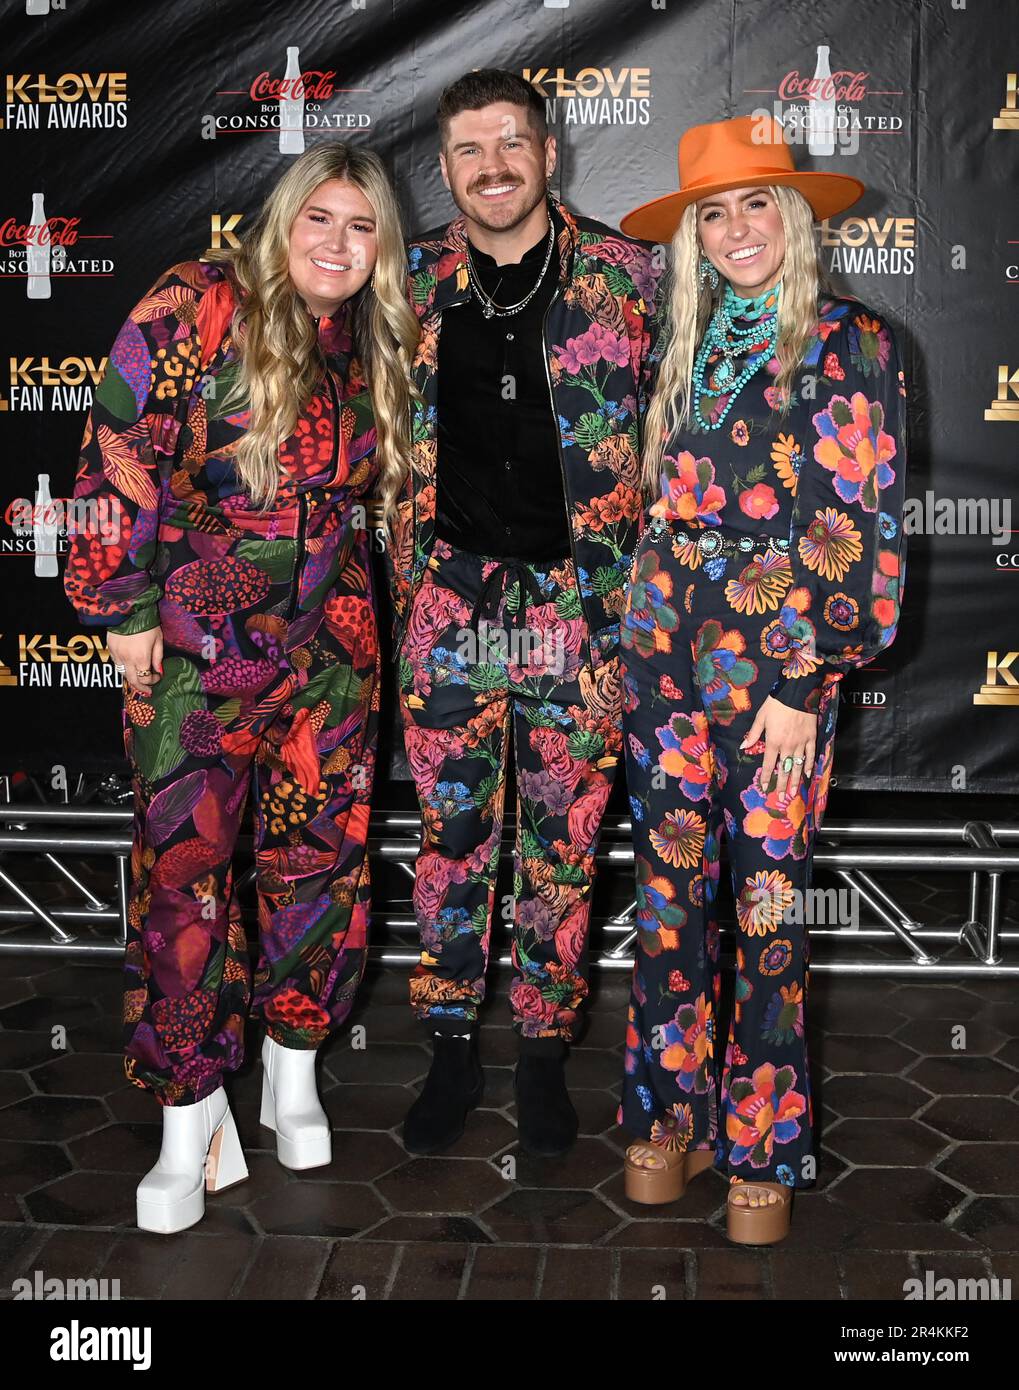 Nashville, USA. 28th May, 2023. Taylor Cain, Logan Cain and Madison Cain at the K-LOVE Fan Awards held at the Grand Ole Opry House on May 28, 2023 in Nashville, TN. © Tammie Arroyo/AFF-USA.com Credit: AFF/Alamy Live News Stock Photo